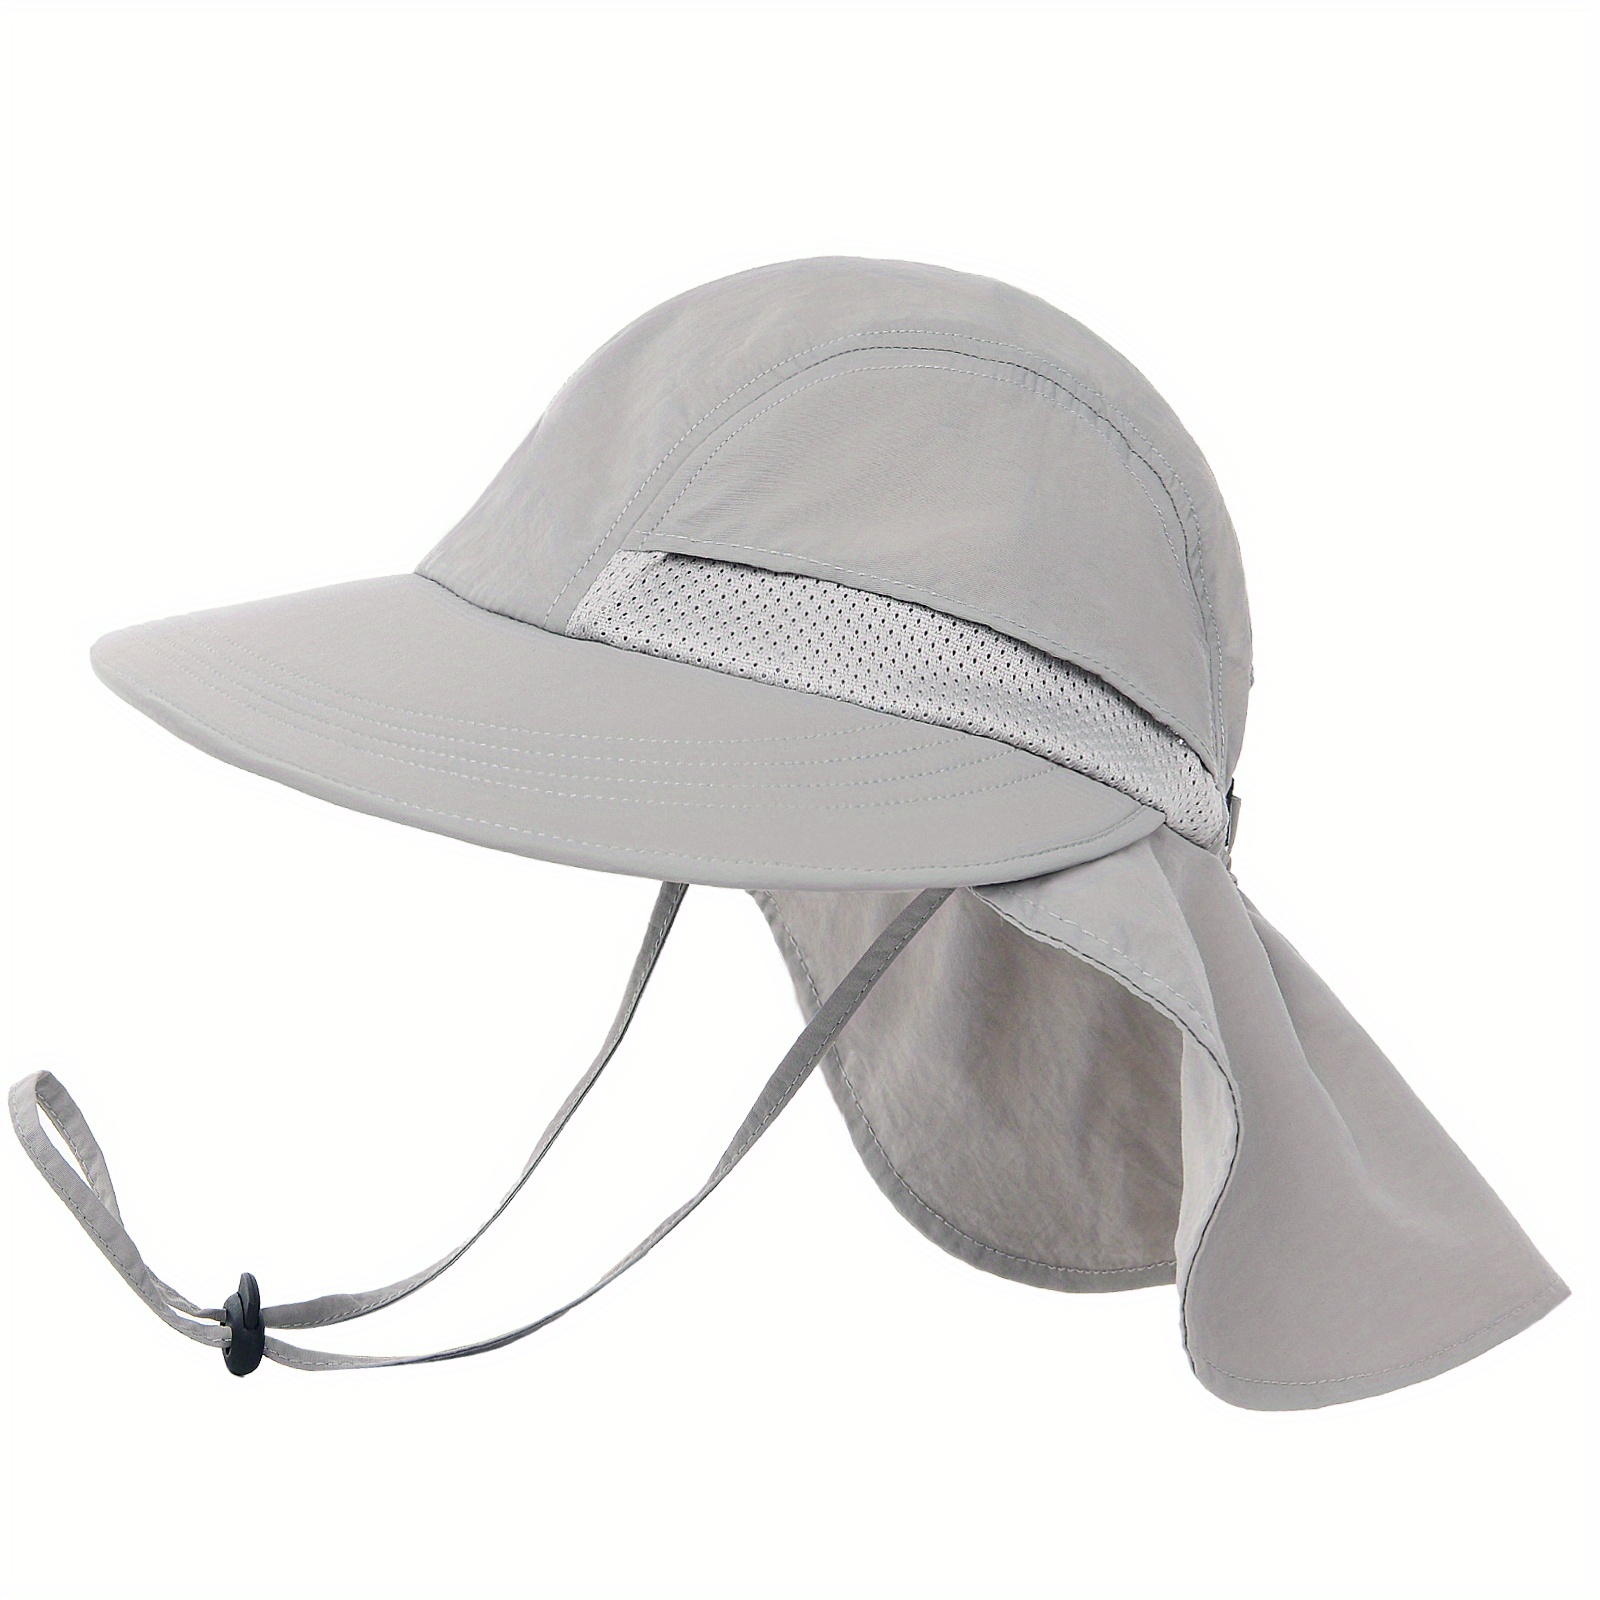 Camptrace Toddler Sun Hat for Kids Baby Beach Sun Protection UPF 50 Boys Girls Fishing Hats (01-grey 2-5t)